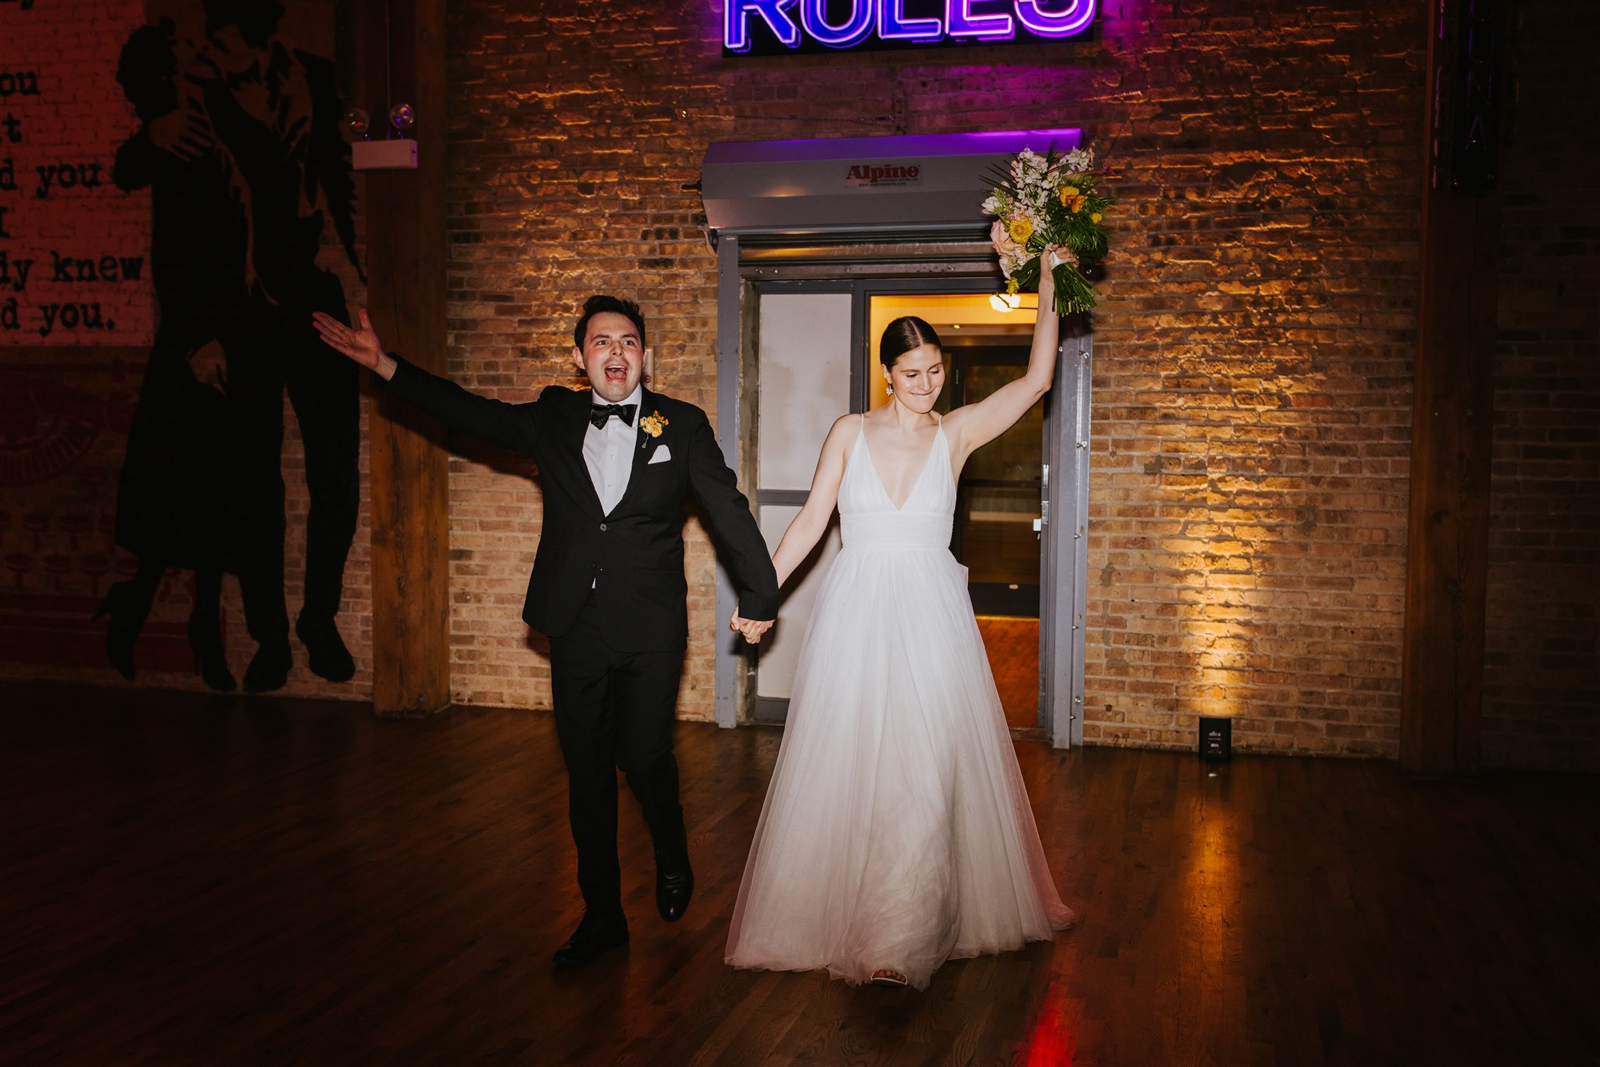 Lacuna Artists Lofts Chicago; 2023 wedding trends